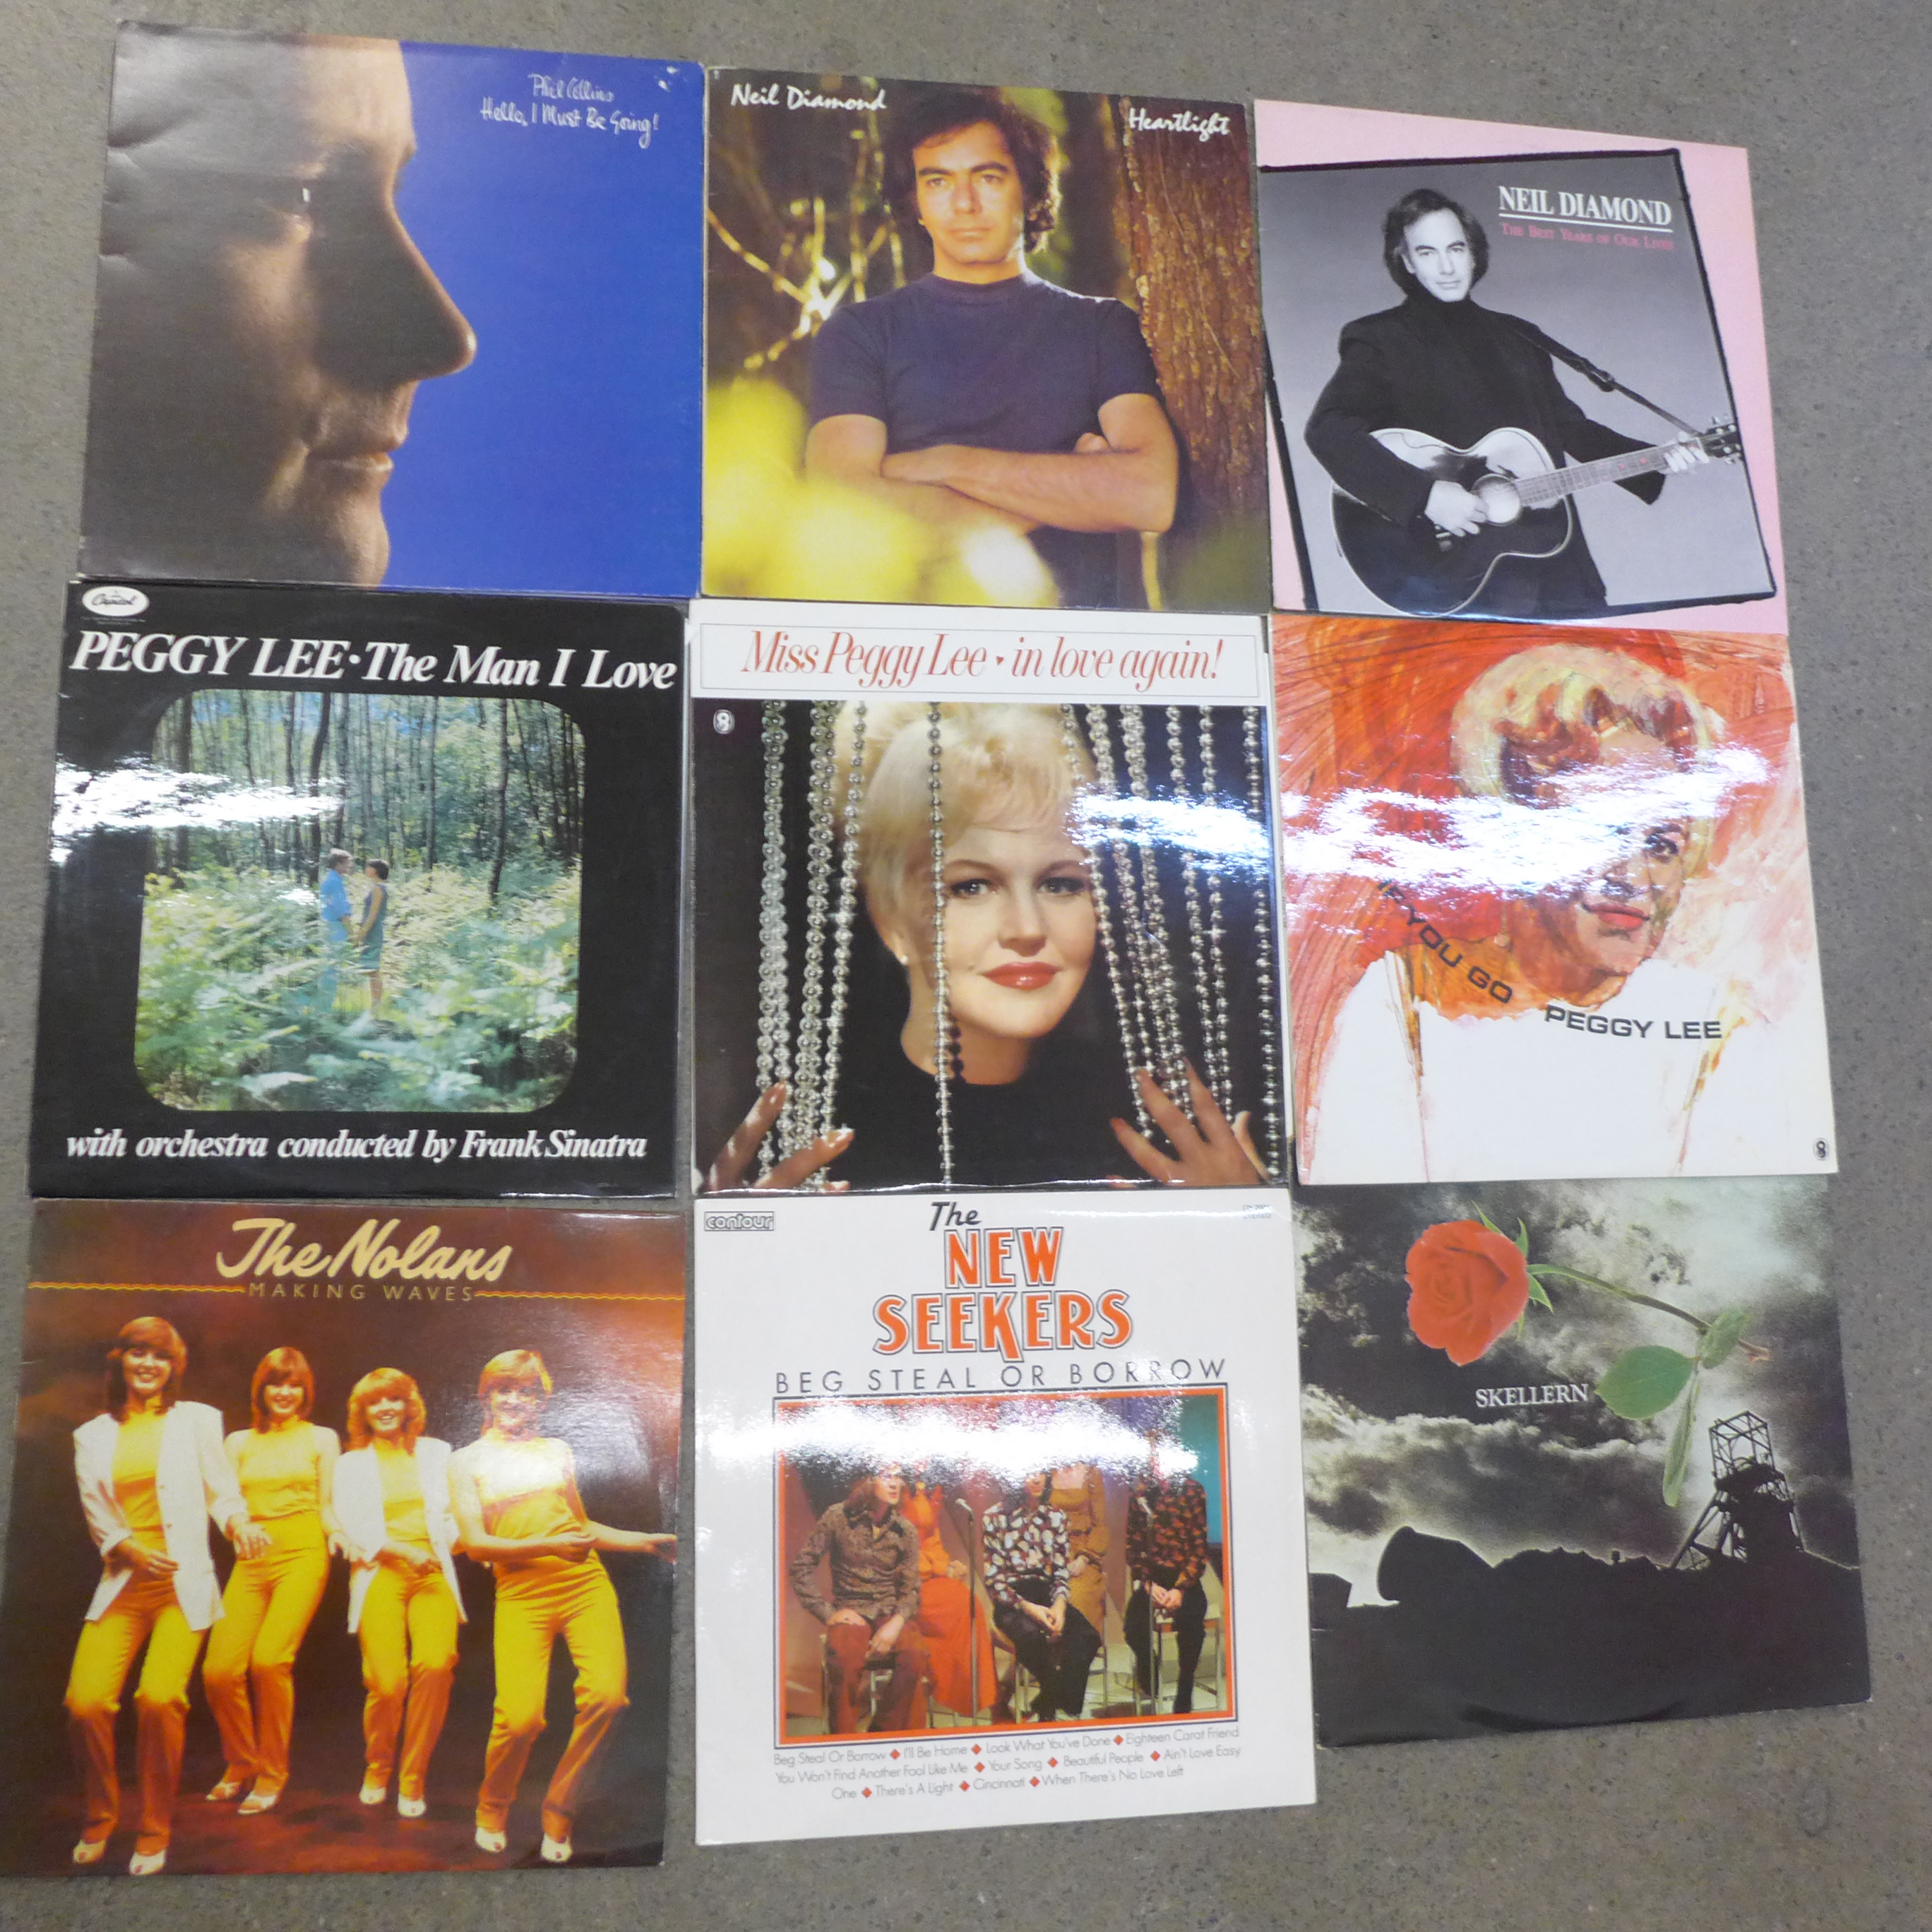 A collection of LP records including Phil Collins, Moody Blues, Robert Palmer, Steve Miller, etc.